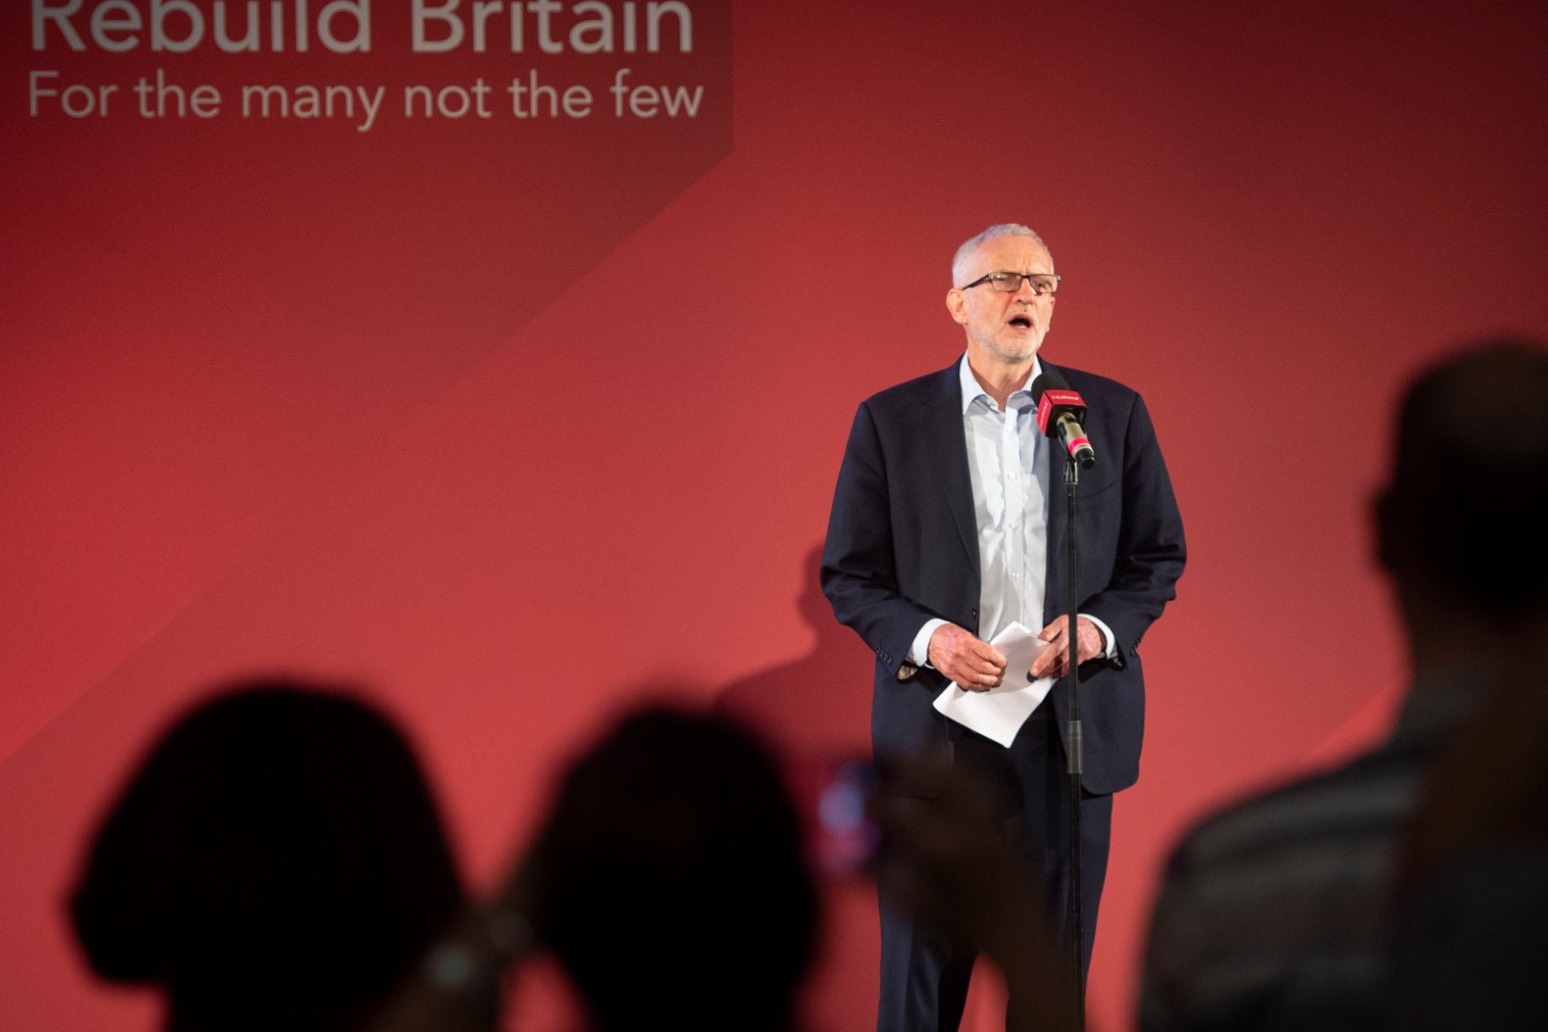 VOTER ID PLANS WILL IMPACT PEOPLE FROM ETHNIC MINORITY BACKGROUNDS, SAYS CORBYN 